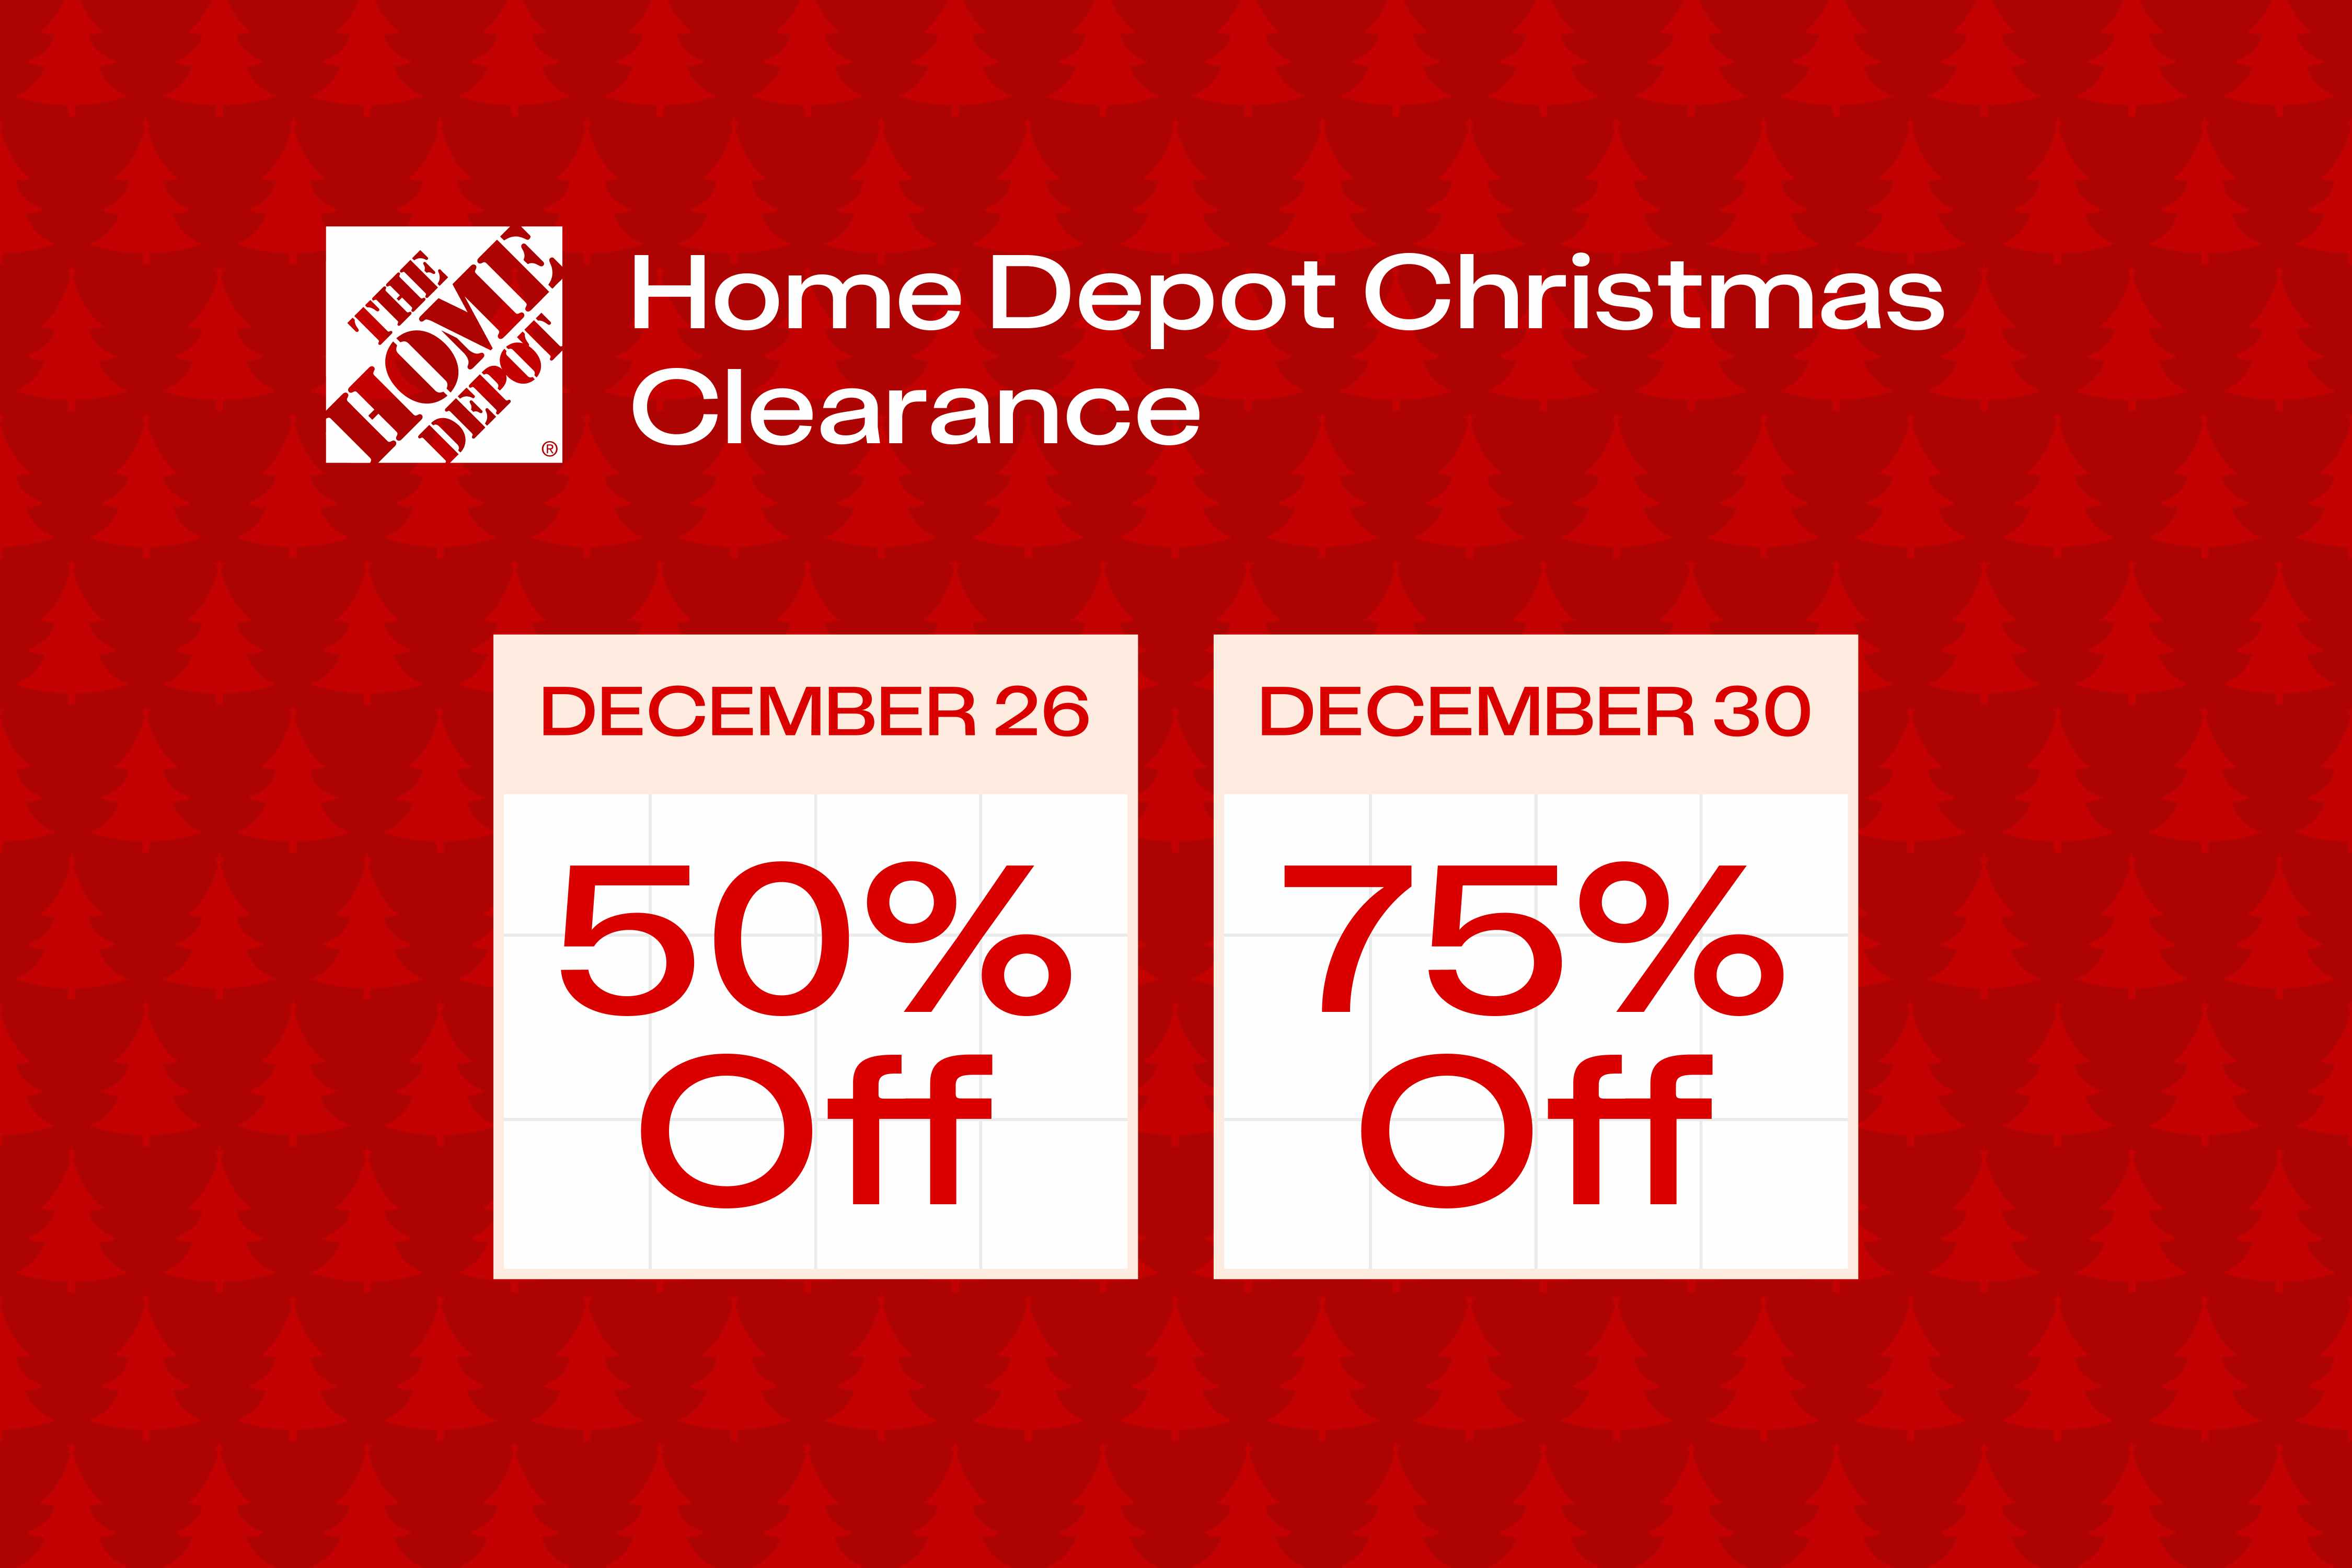 Home Depot Hours - Opening, Closing, Holidays